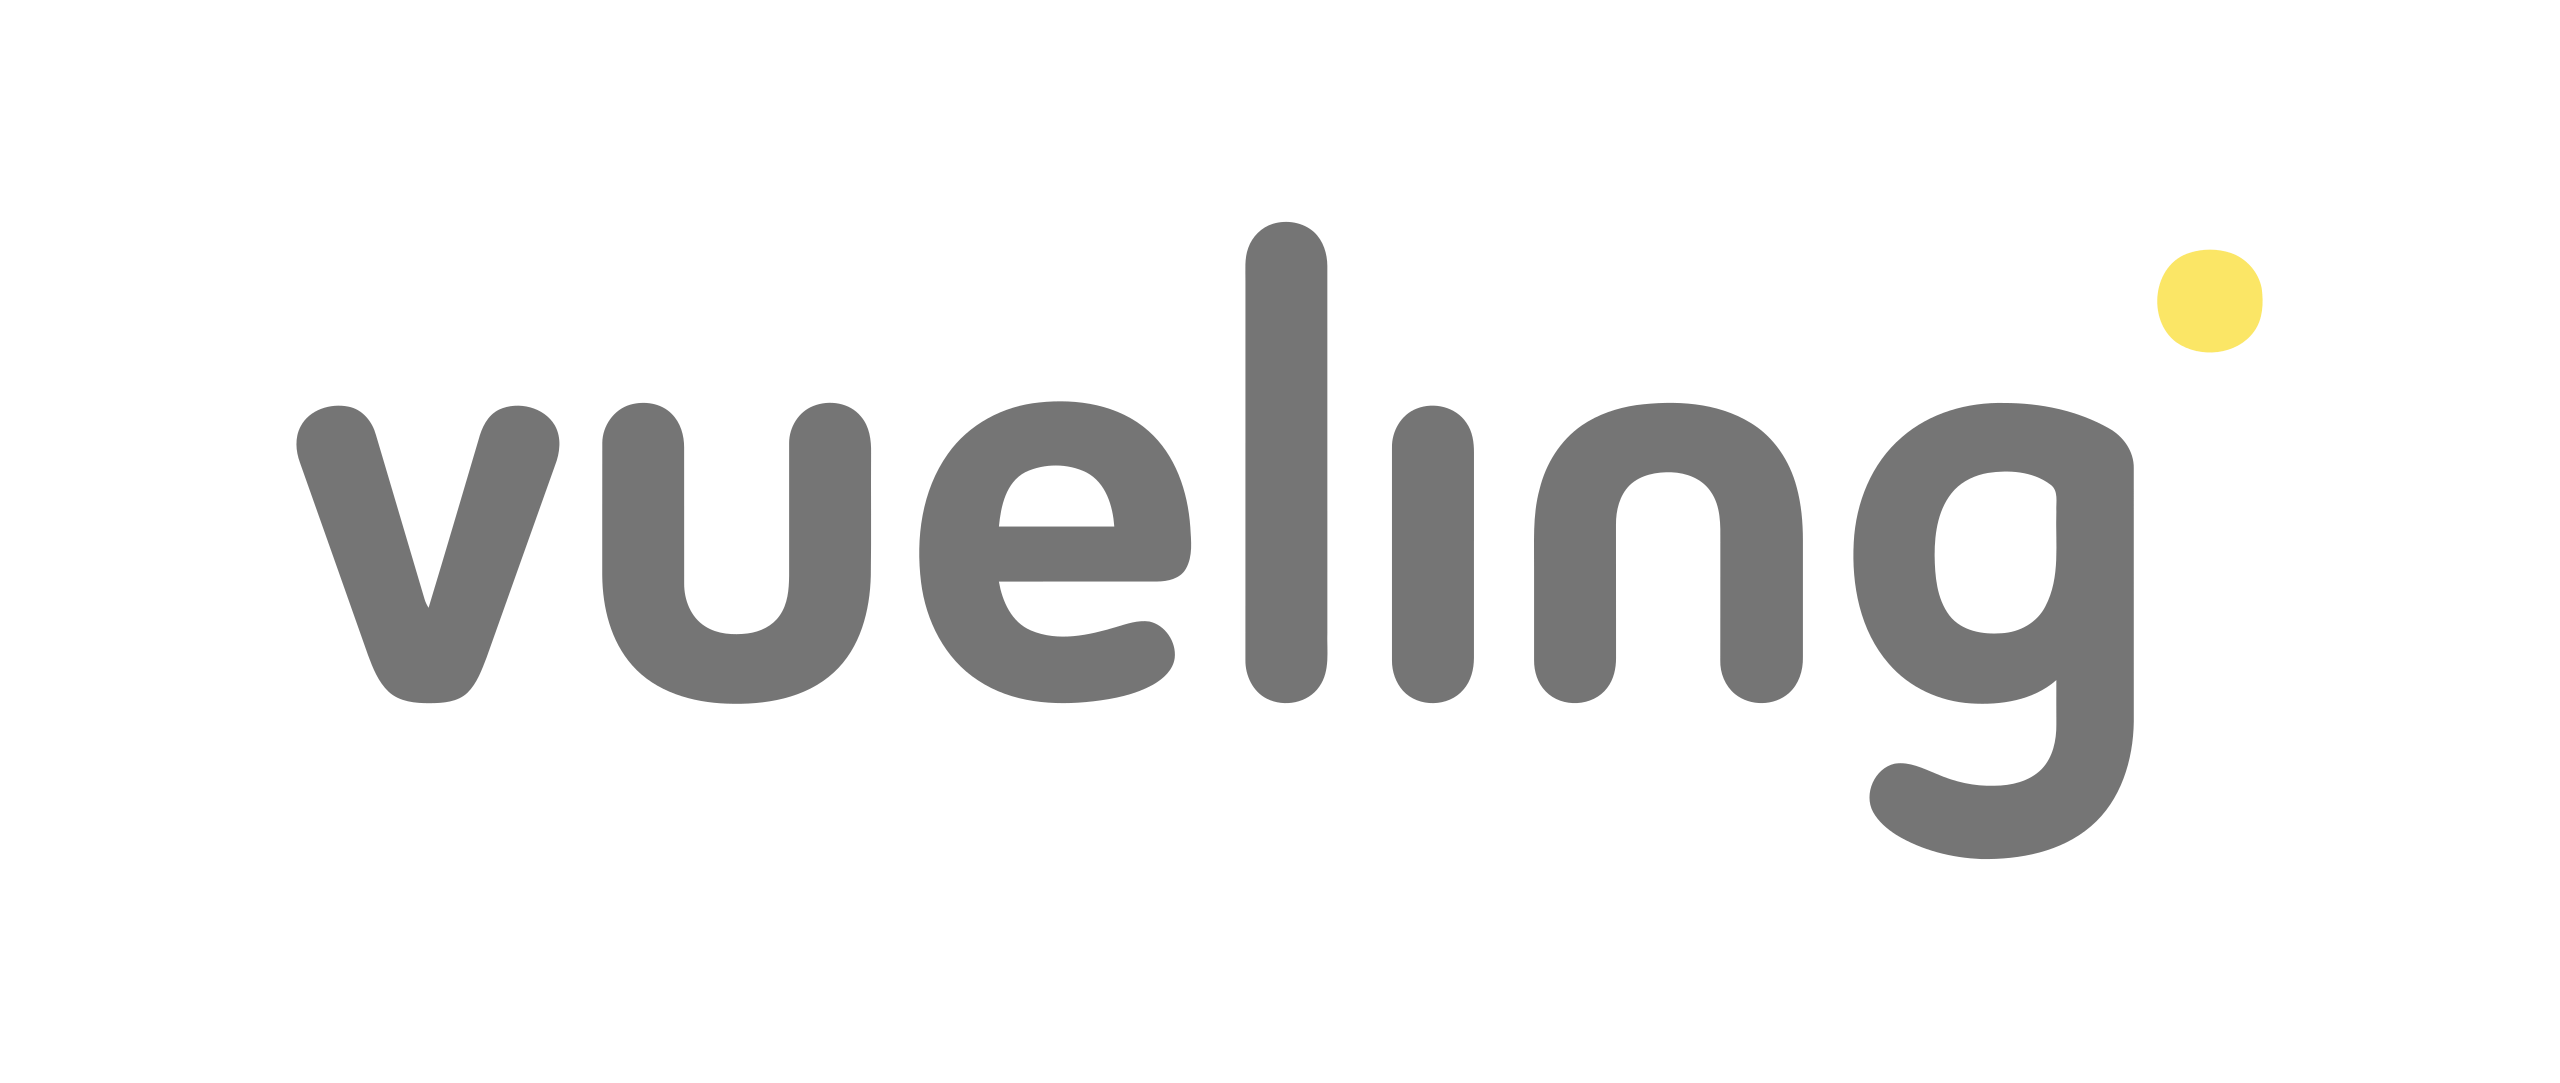 Vueling airlines logo